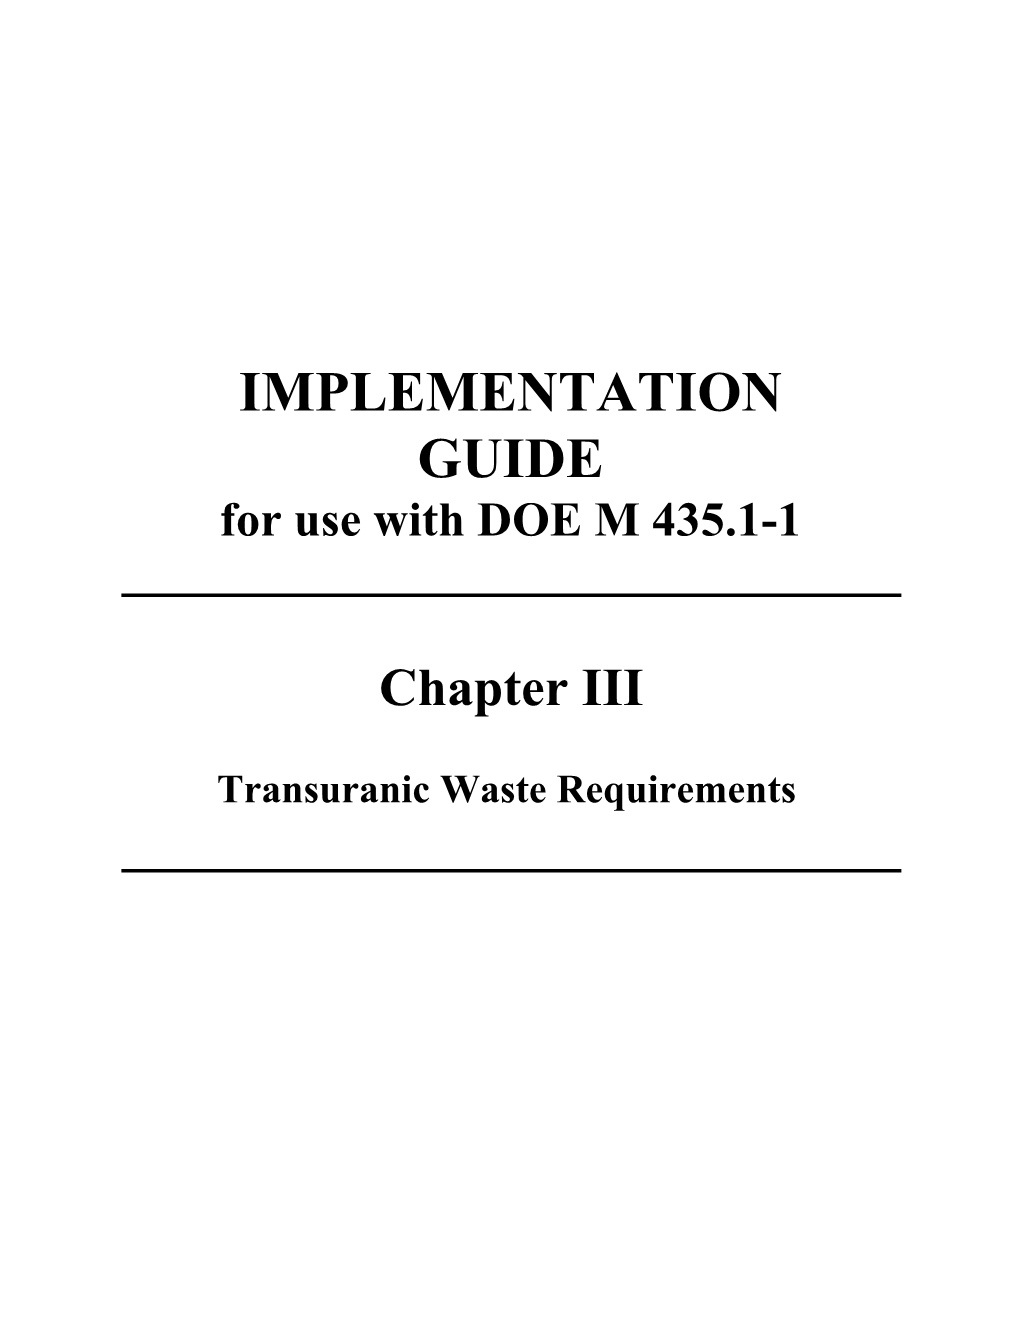 IMPLEMENTATION GUIDE for Use with DOE M 435.1-1